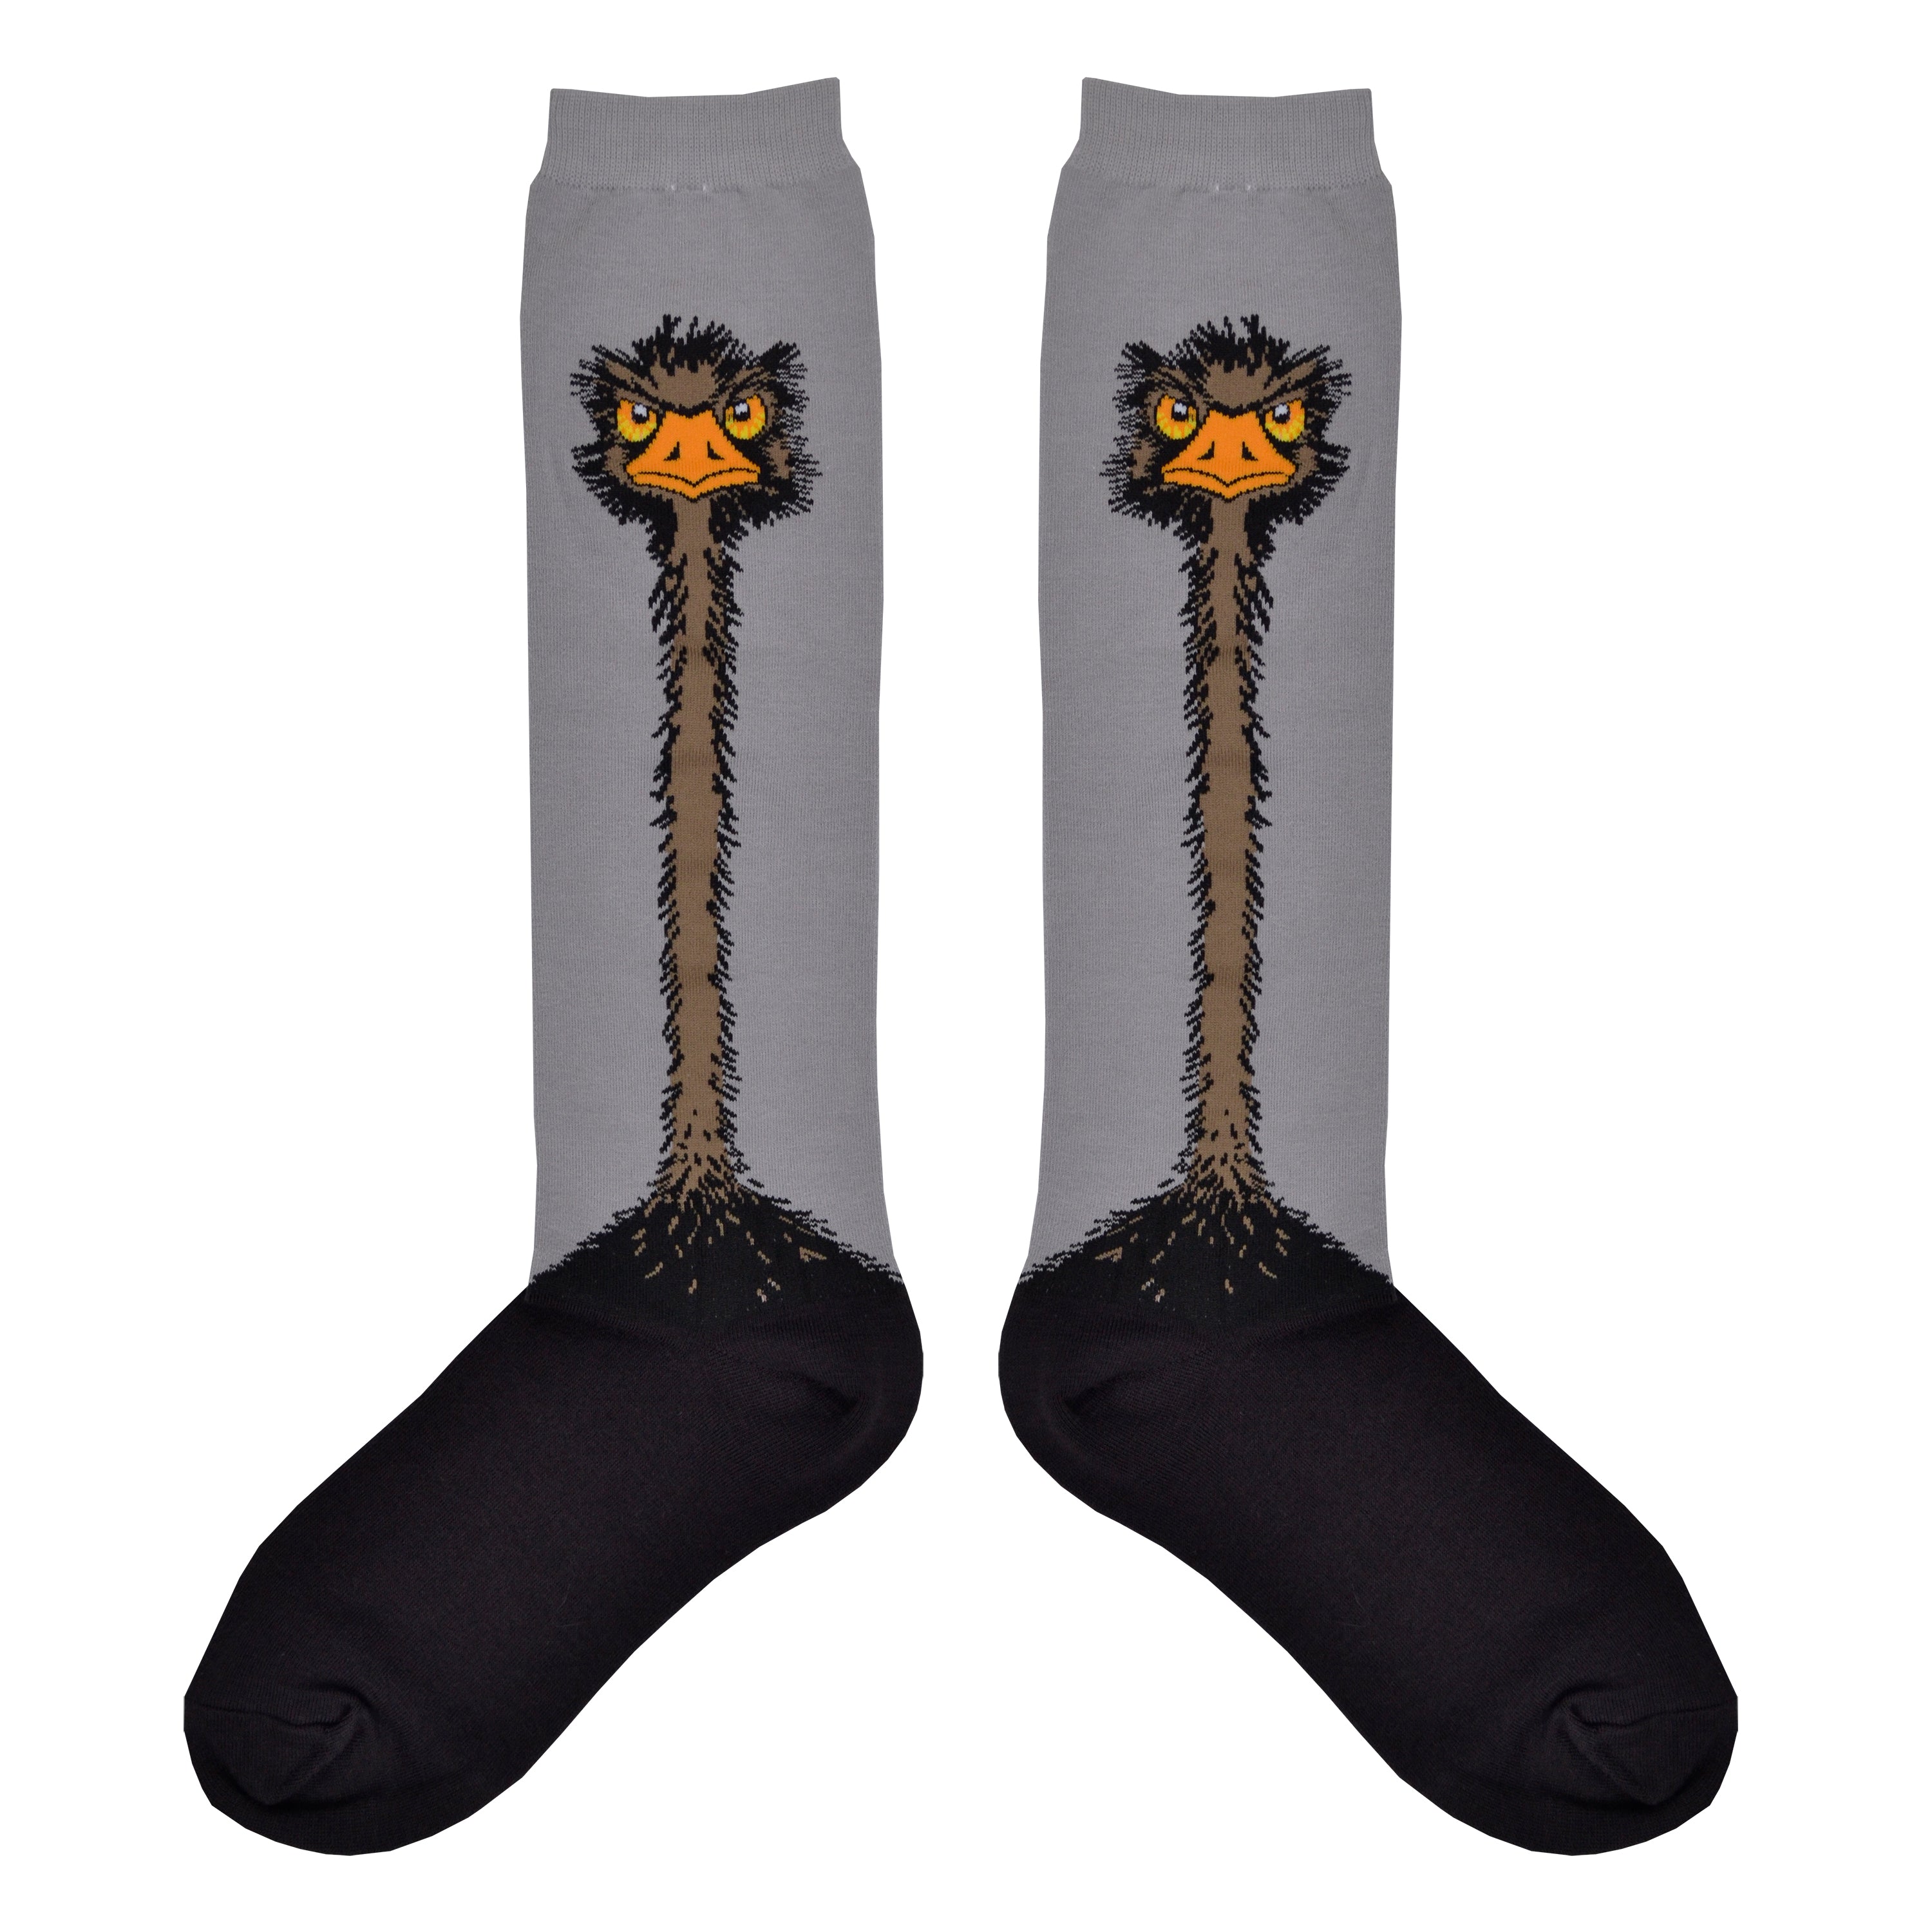 Shown in a flatlay, a pair of Sock It To Me brand Stretch It cotton knee high socks in grey and black. The leg of the sock is grey with a cartoon ostrich design going down the leg and transitioning into the black foot of the sock.